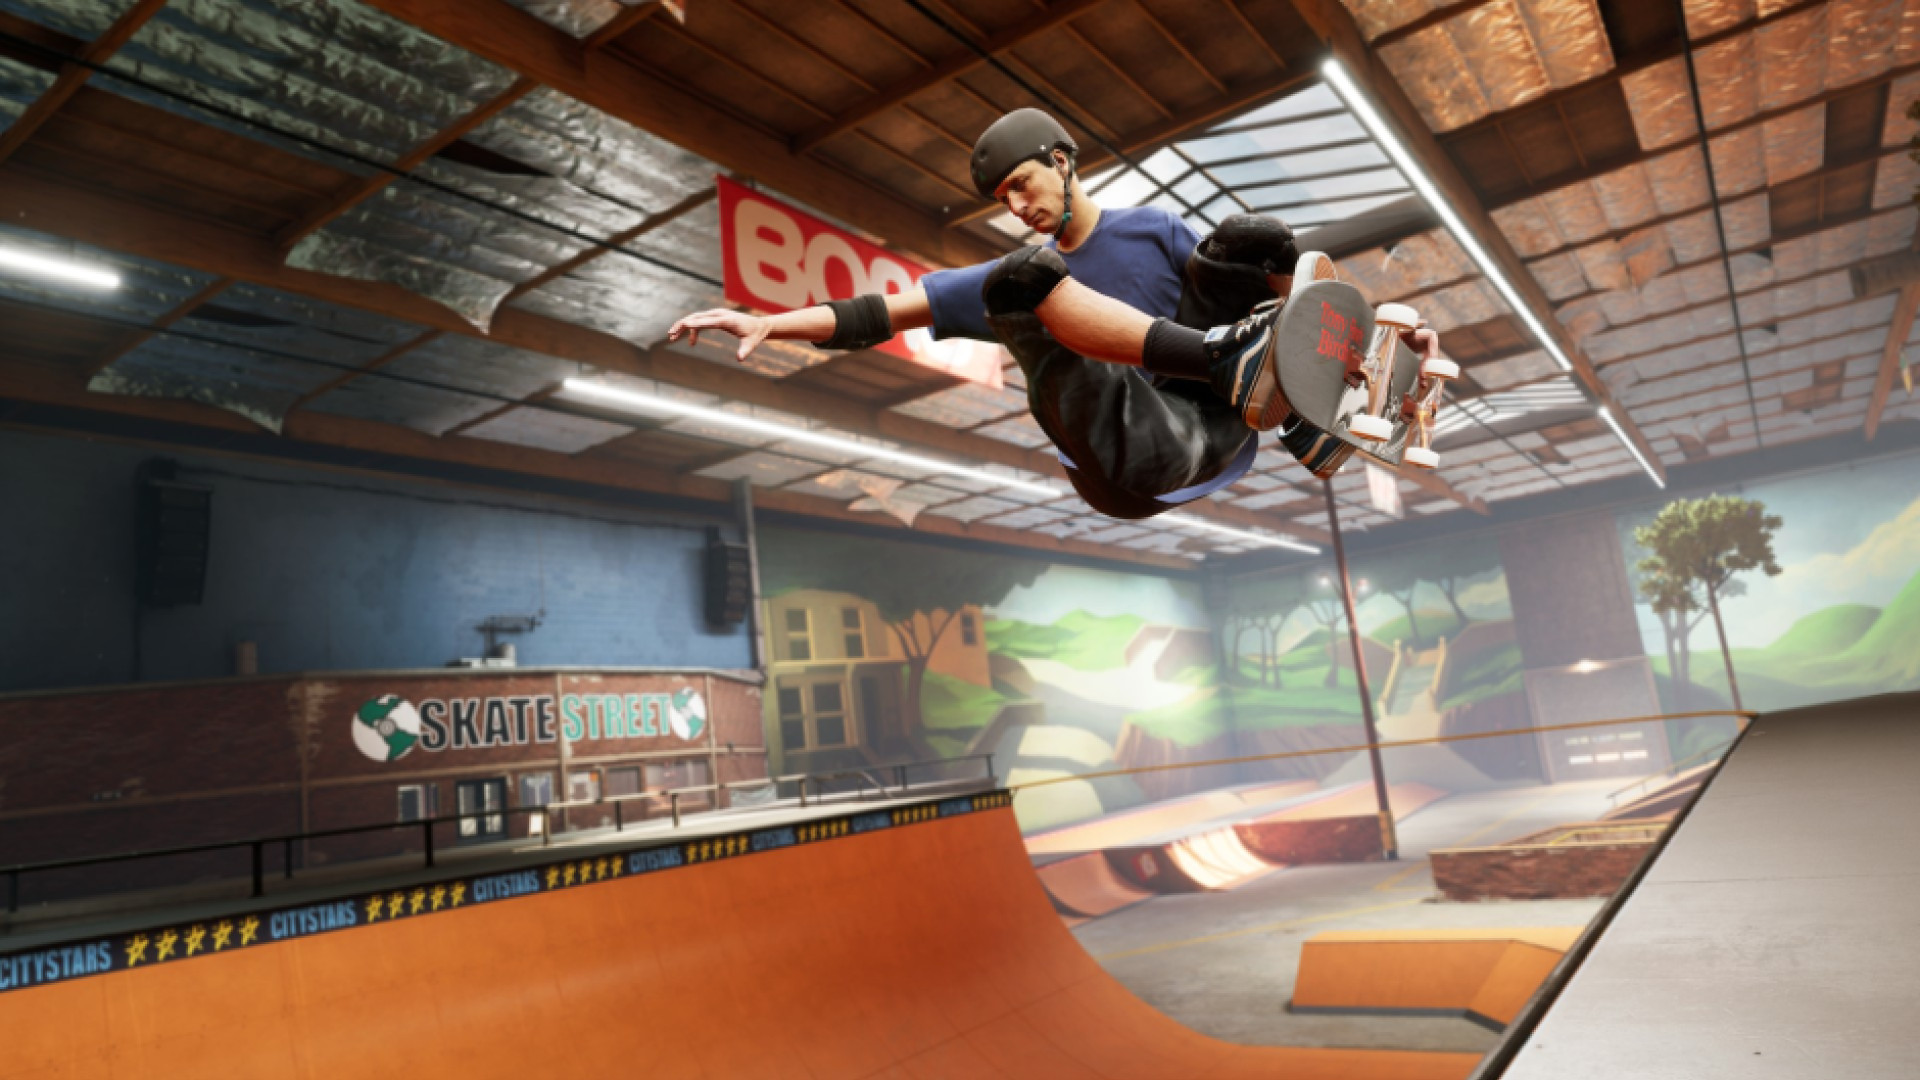 Tony Hawk's Pro Skater 1 and 2: Inter-Generation Luxury Package